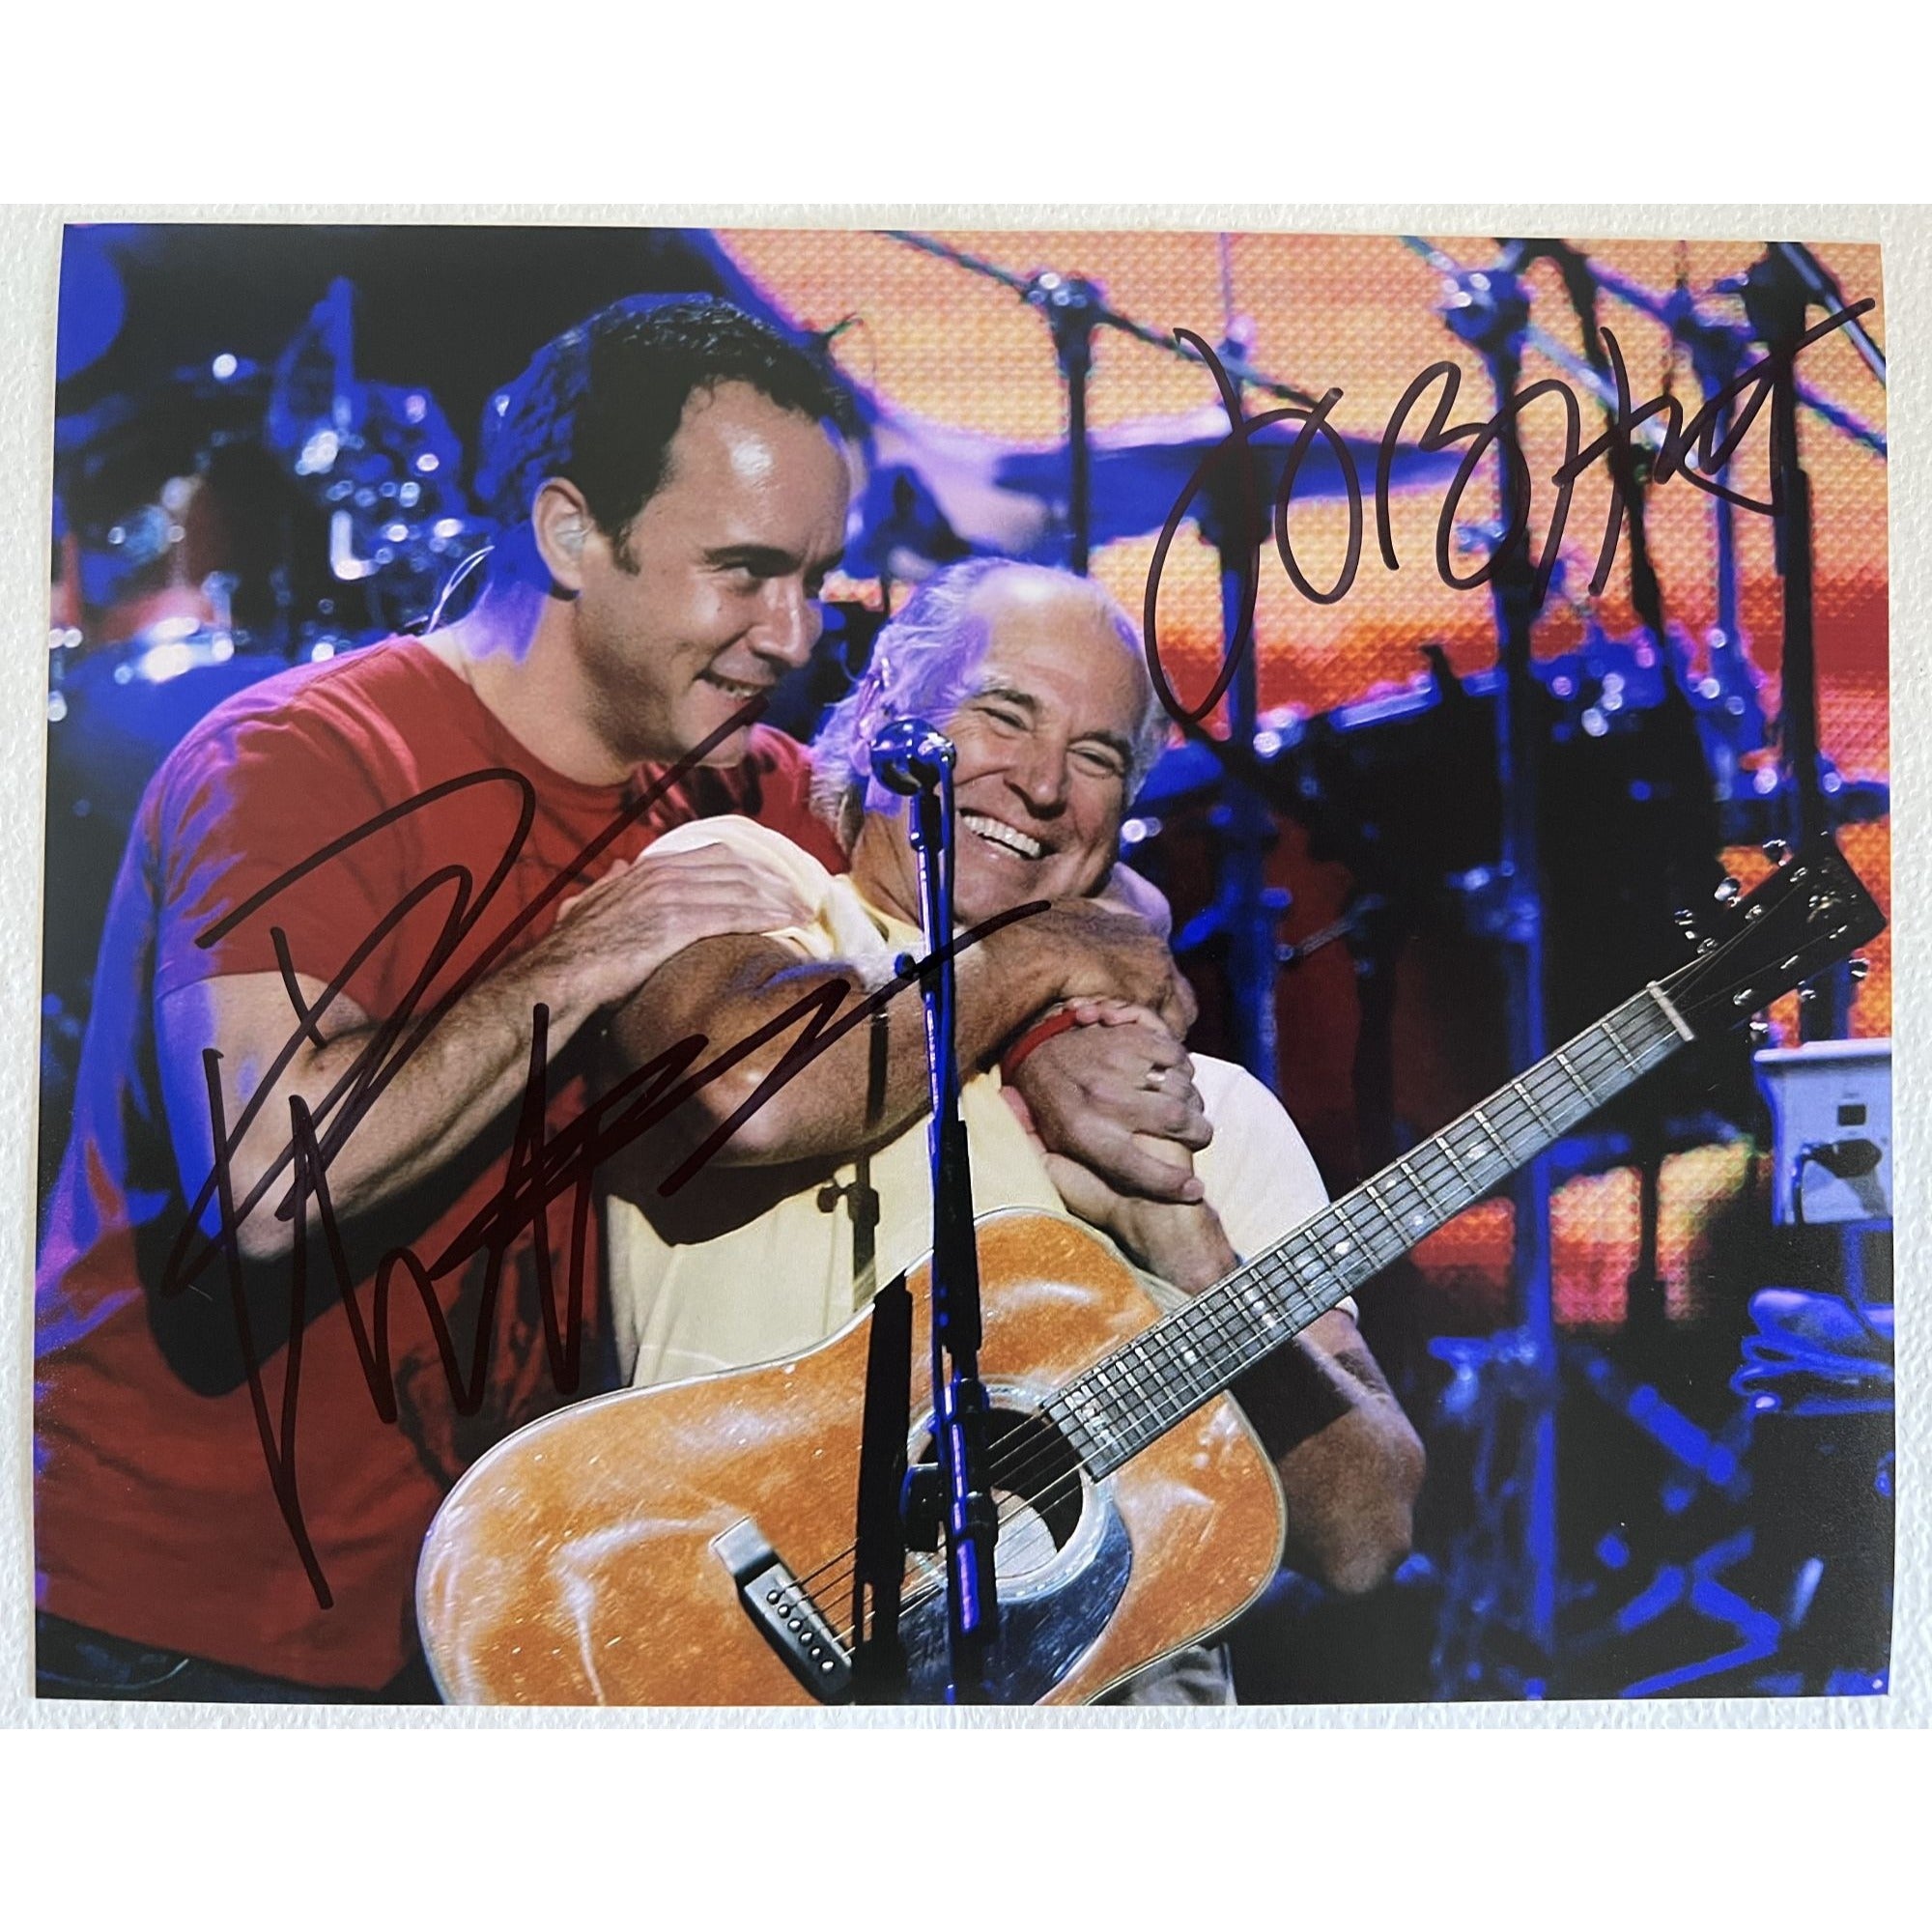 Jimmy Buffet Dave Matthews 8x10 photo signed with proof